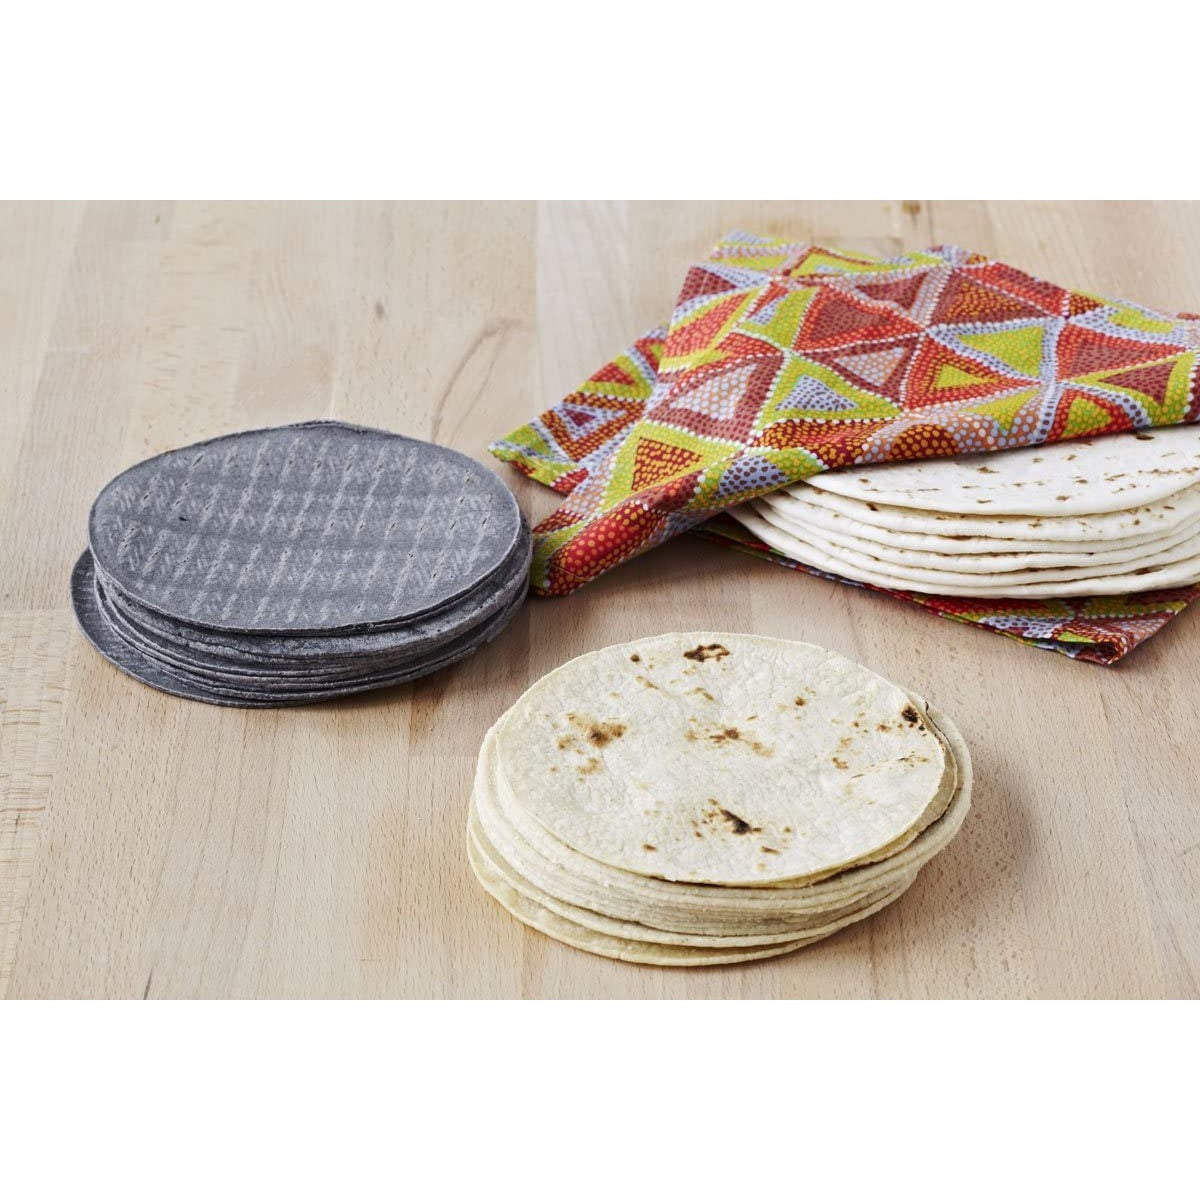 Two stacks of freshly cooked tortillas with a pile of grey placemats nearby.